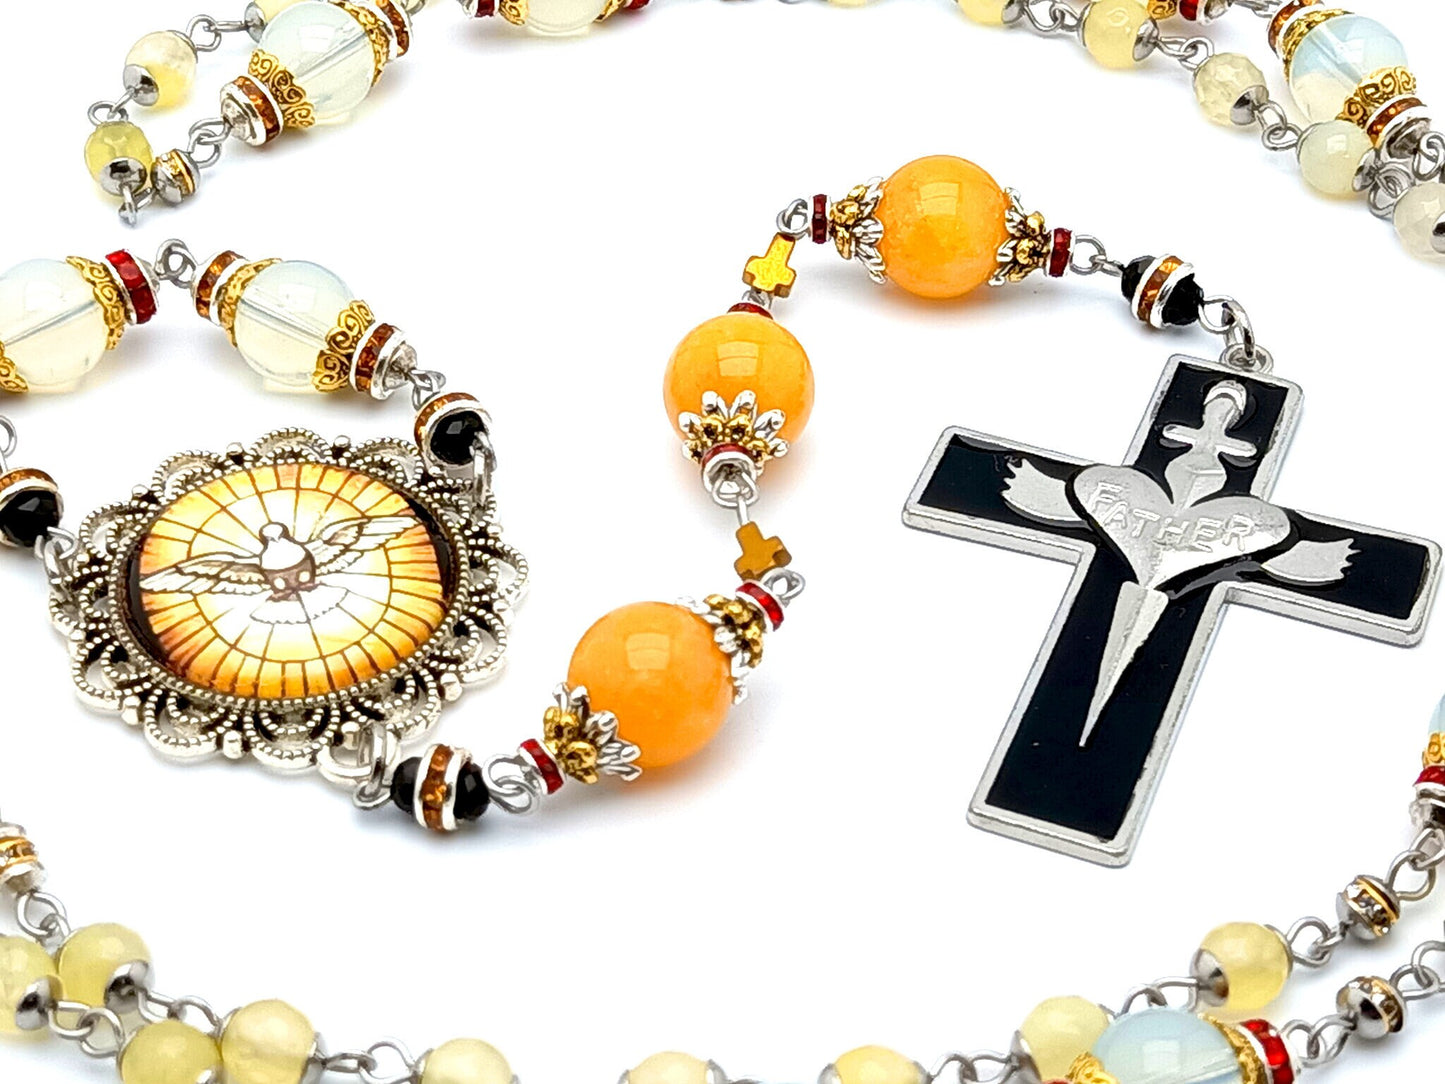 Holy Spirit uniuq rosary beads prayer chaplet with agate opal and jade gemstone beads and Holy Spirit enamel crucifix.